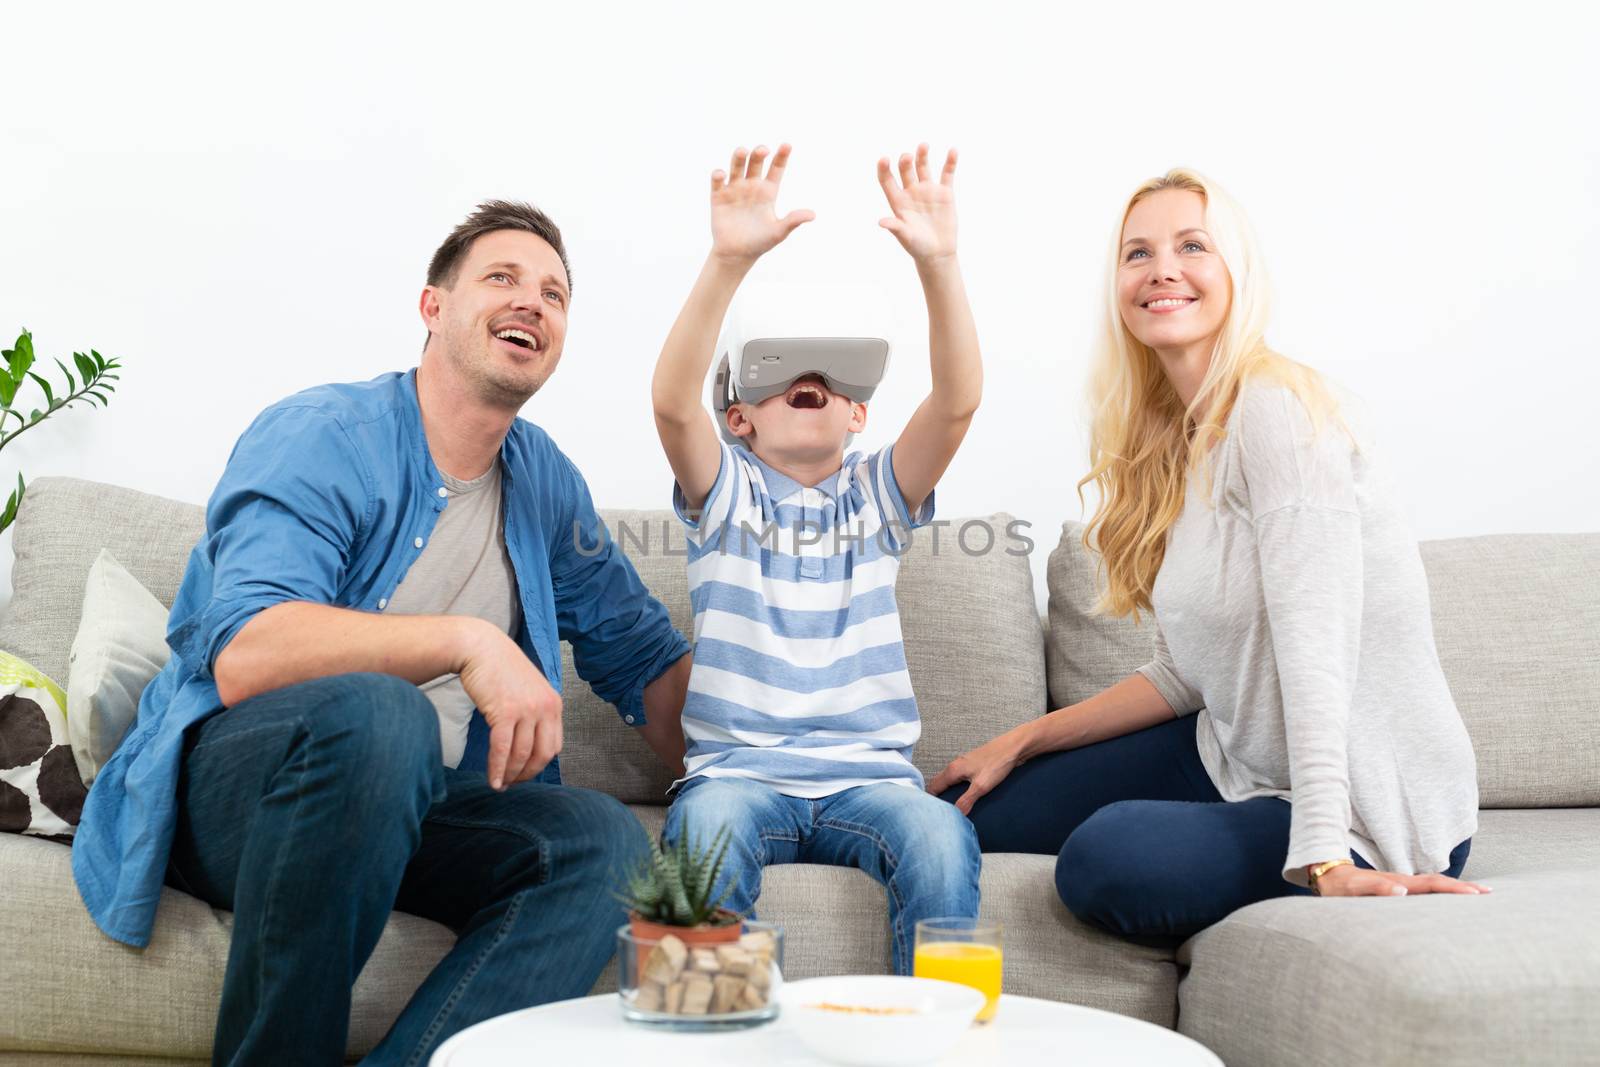 Happy family at home on living room sofa having fun playing games using virtual reality headset by kasto